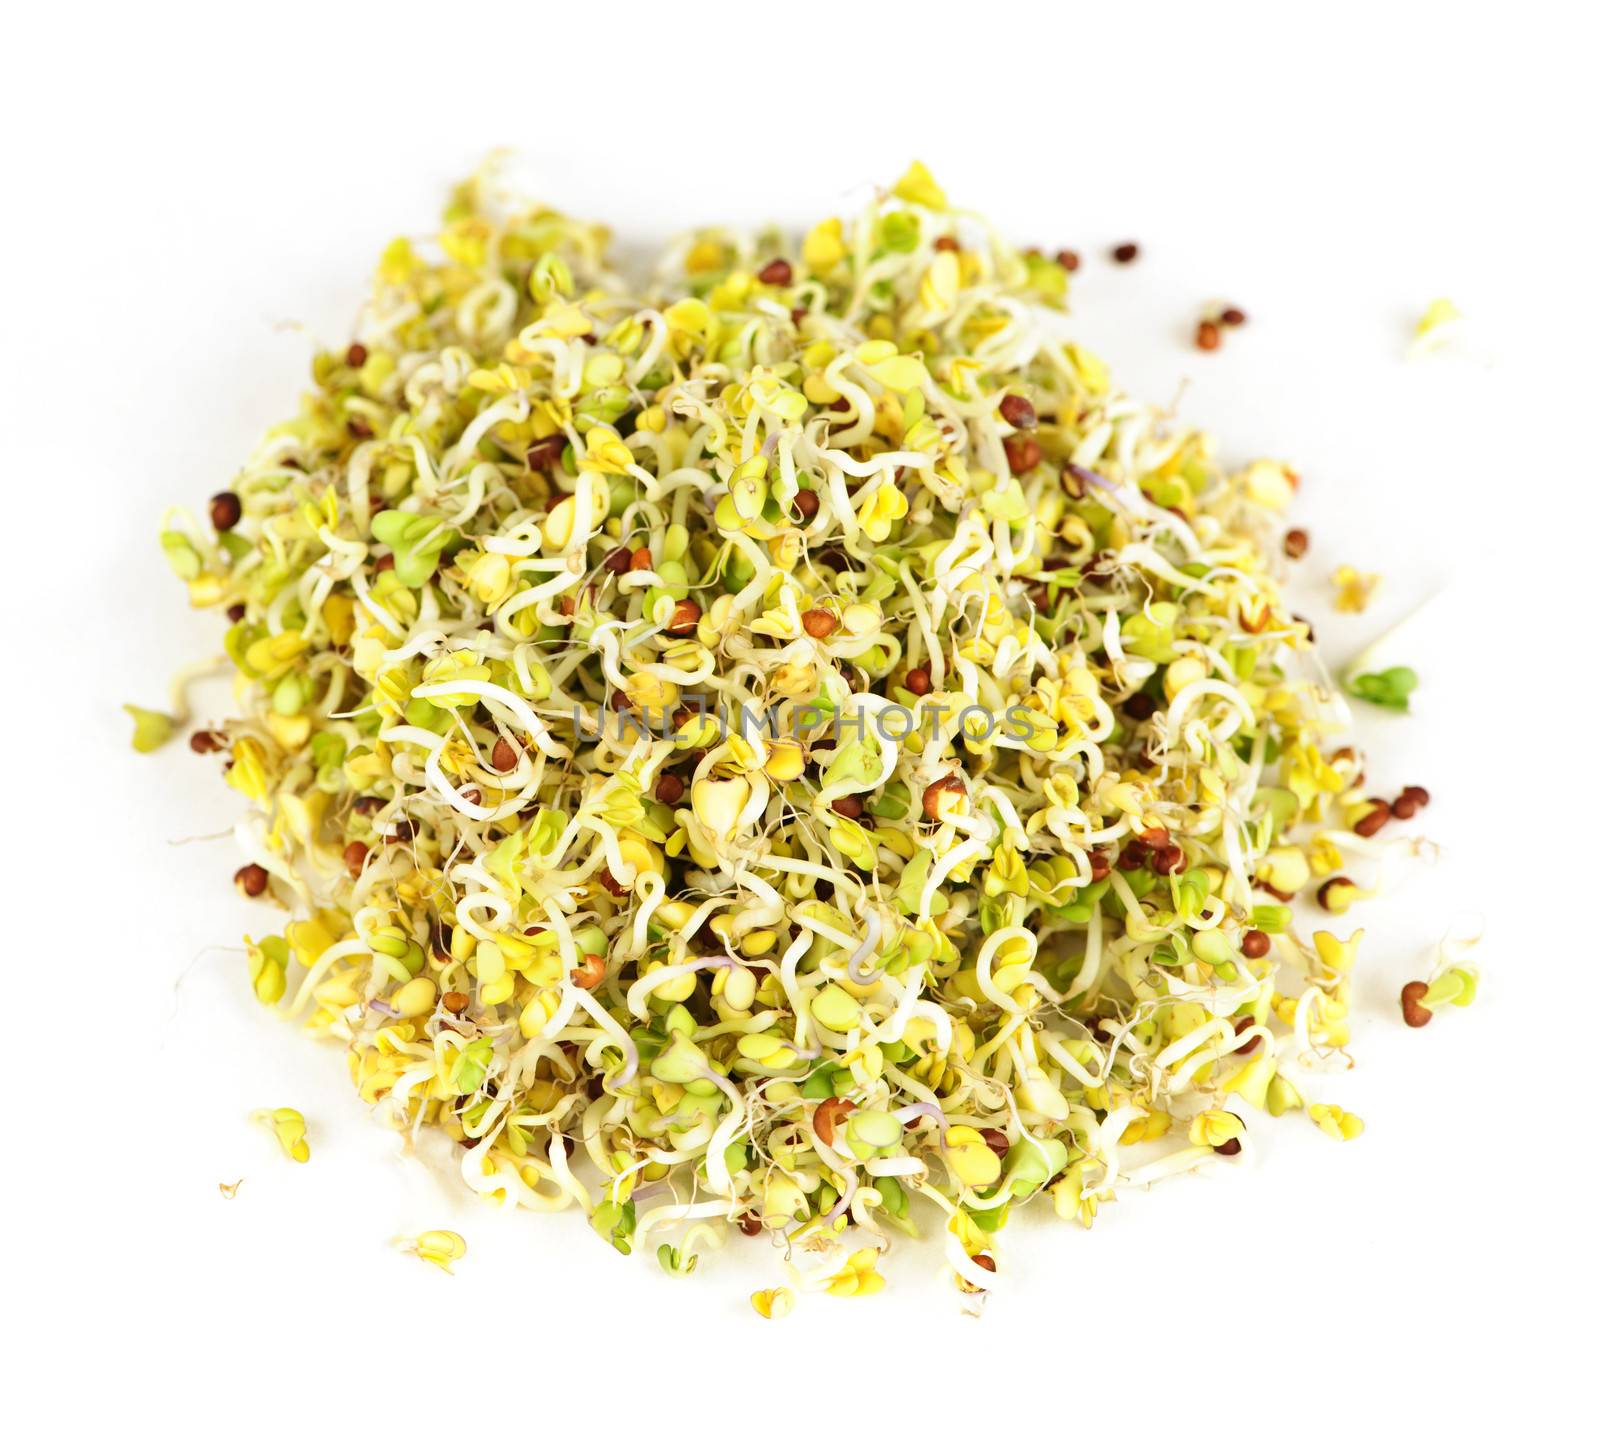 Alfalfa sprouts by elenathewise